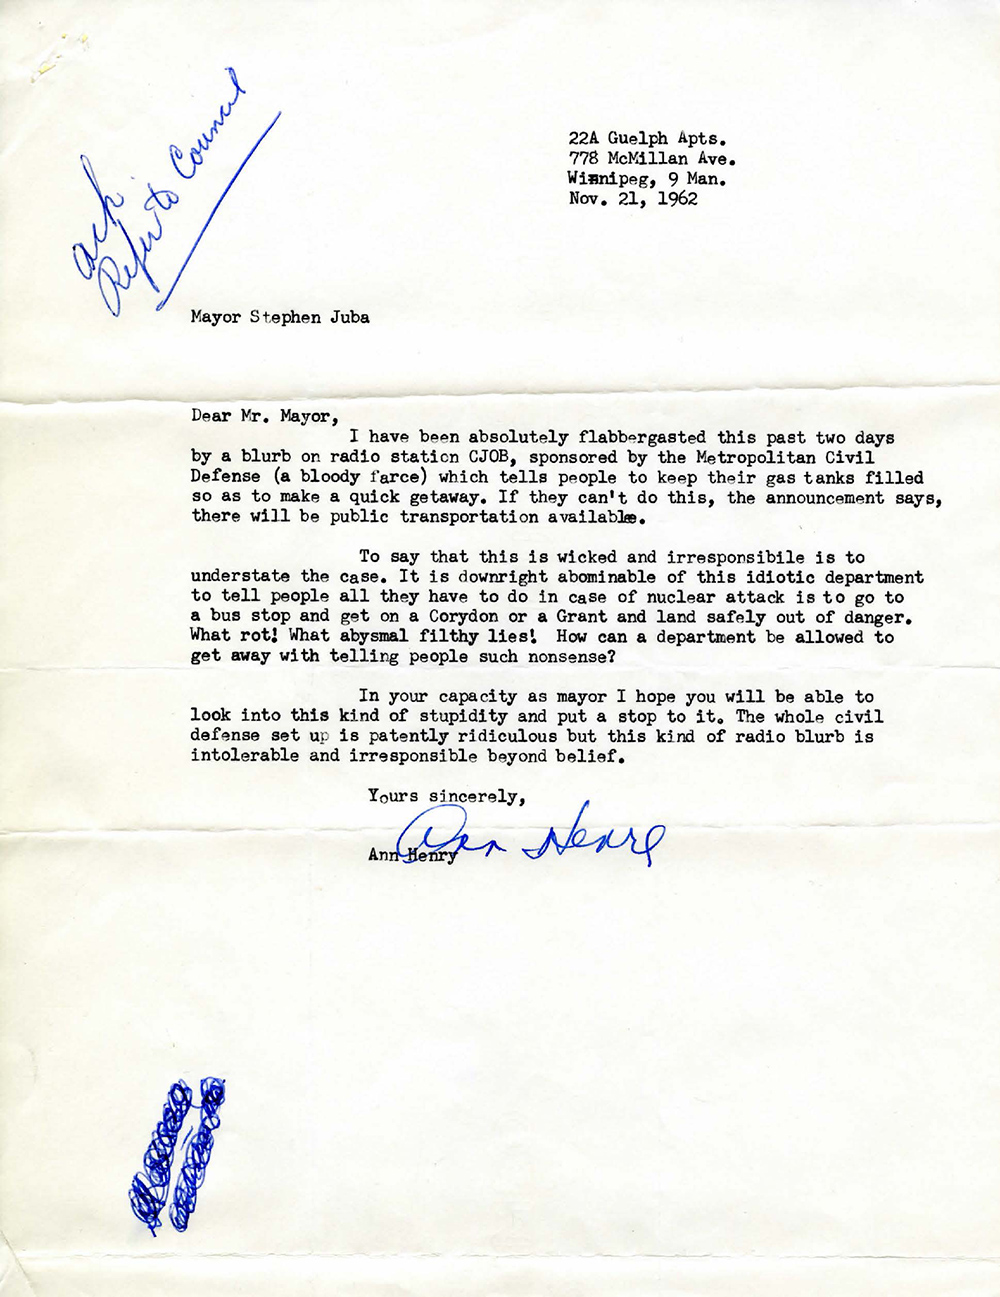 Letter from Ann Henry received as information by City Council, 1962. 